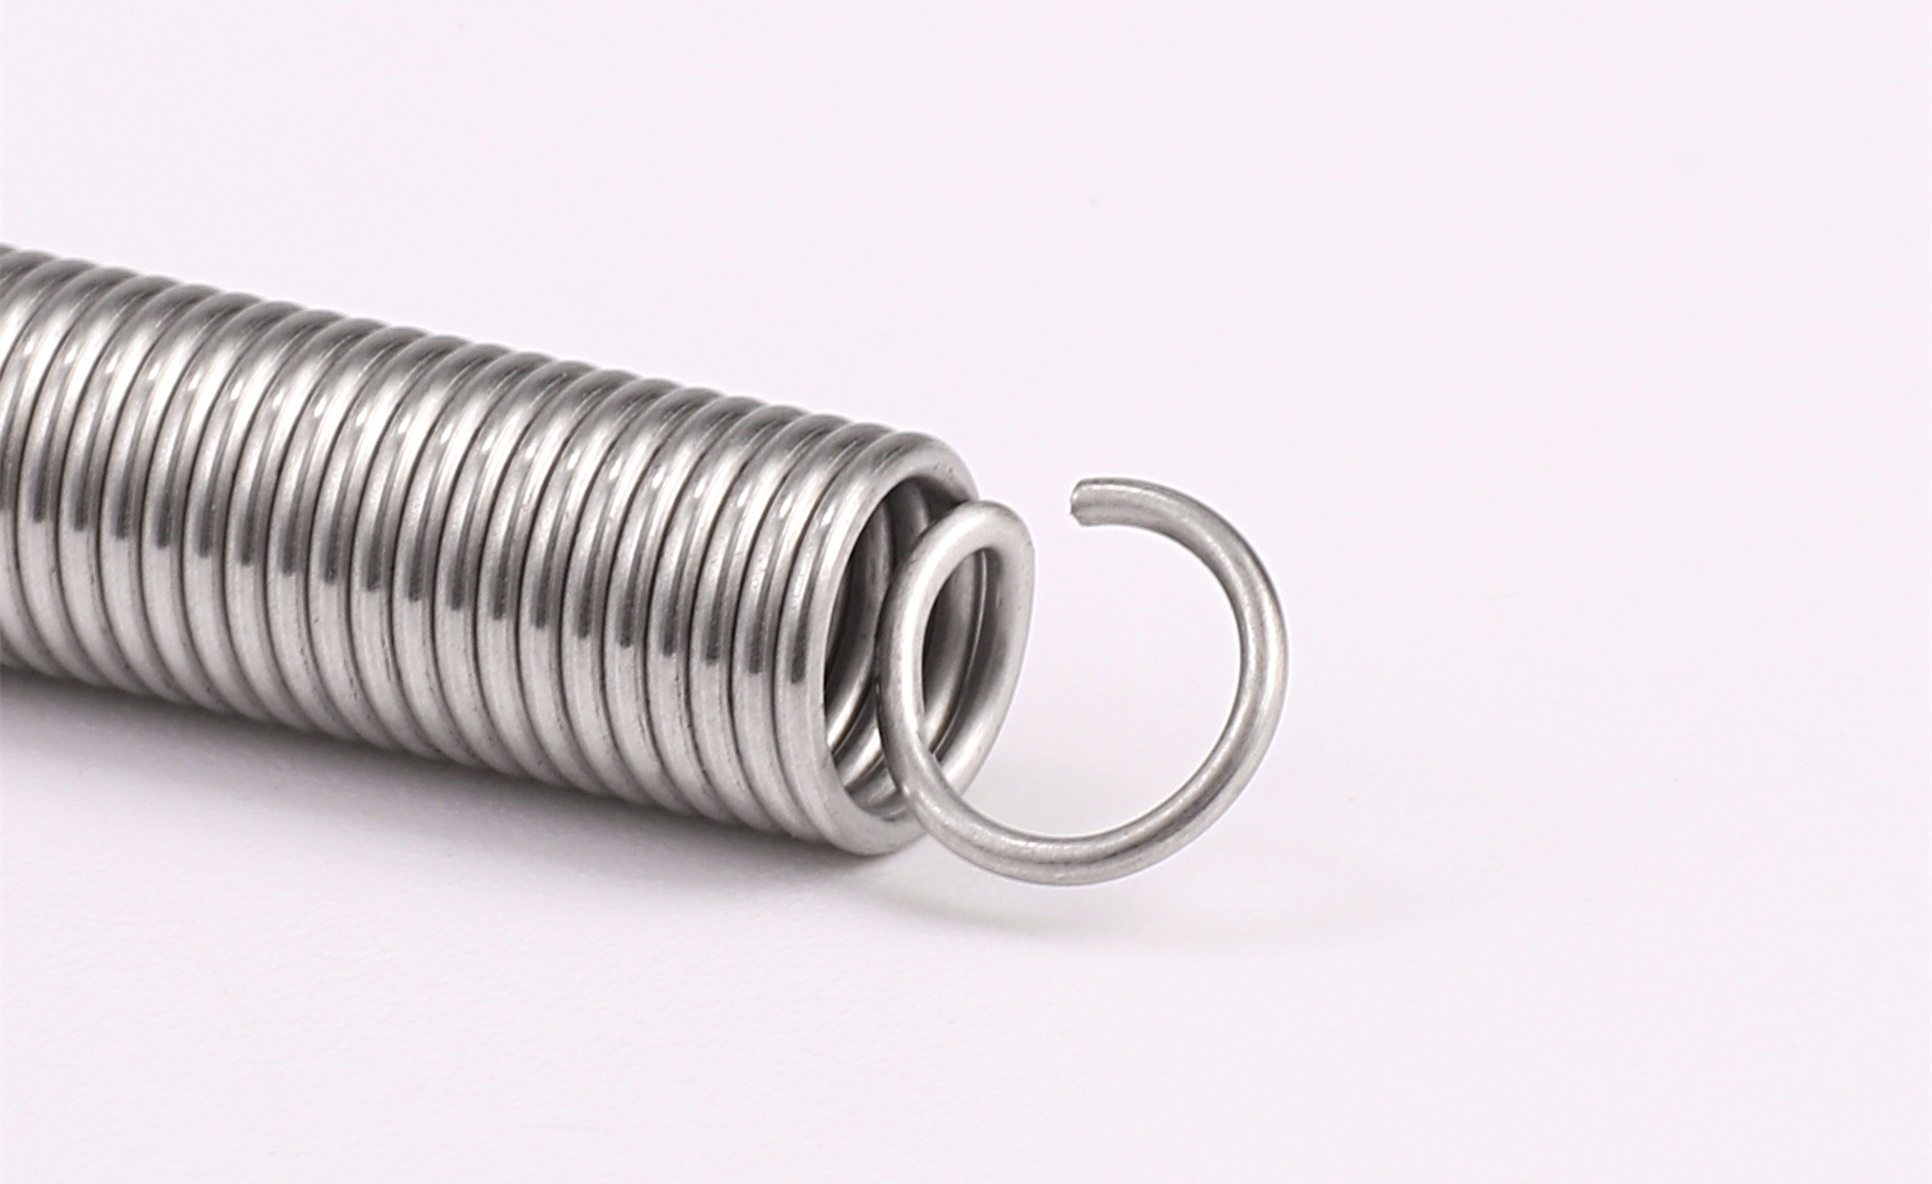 The working characteristic of tension spring